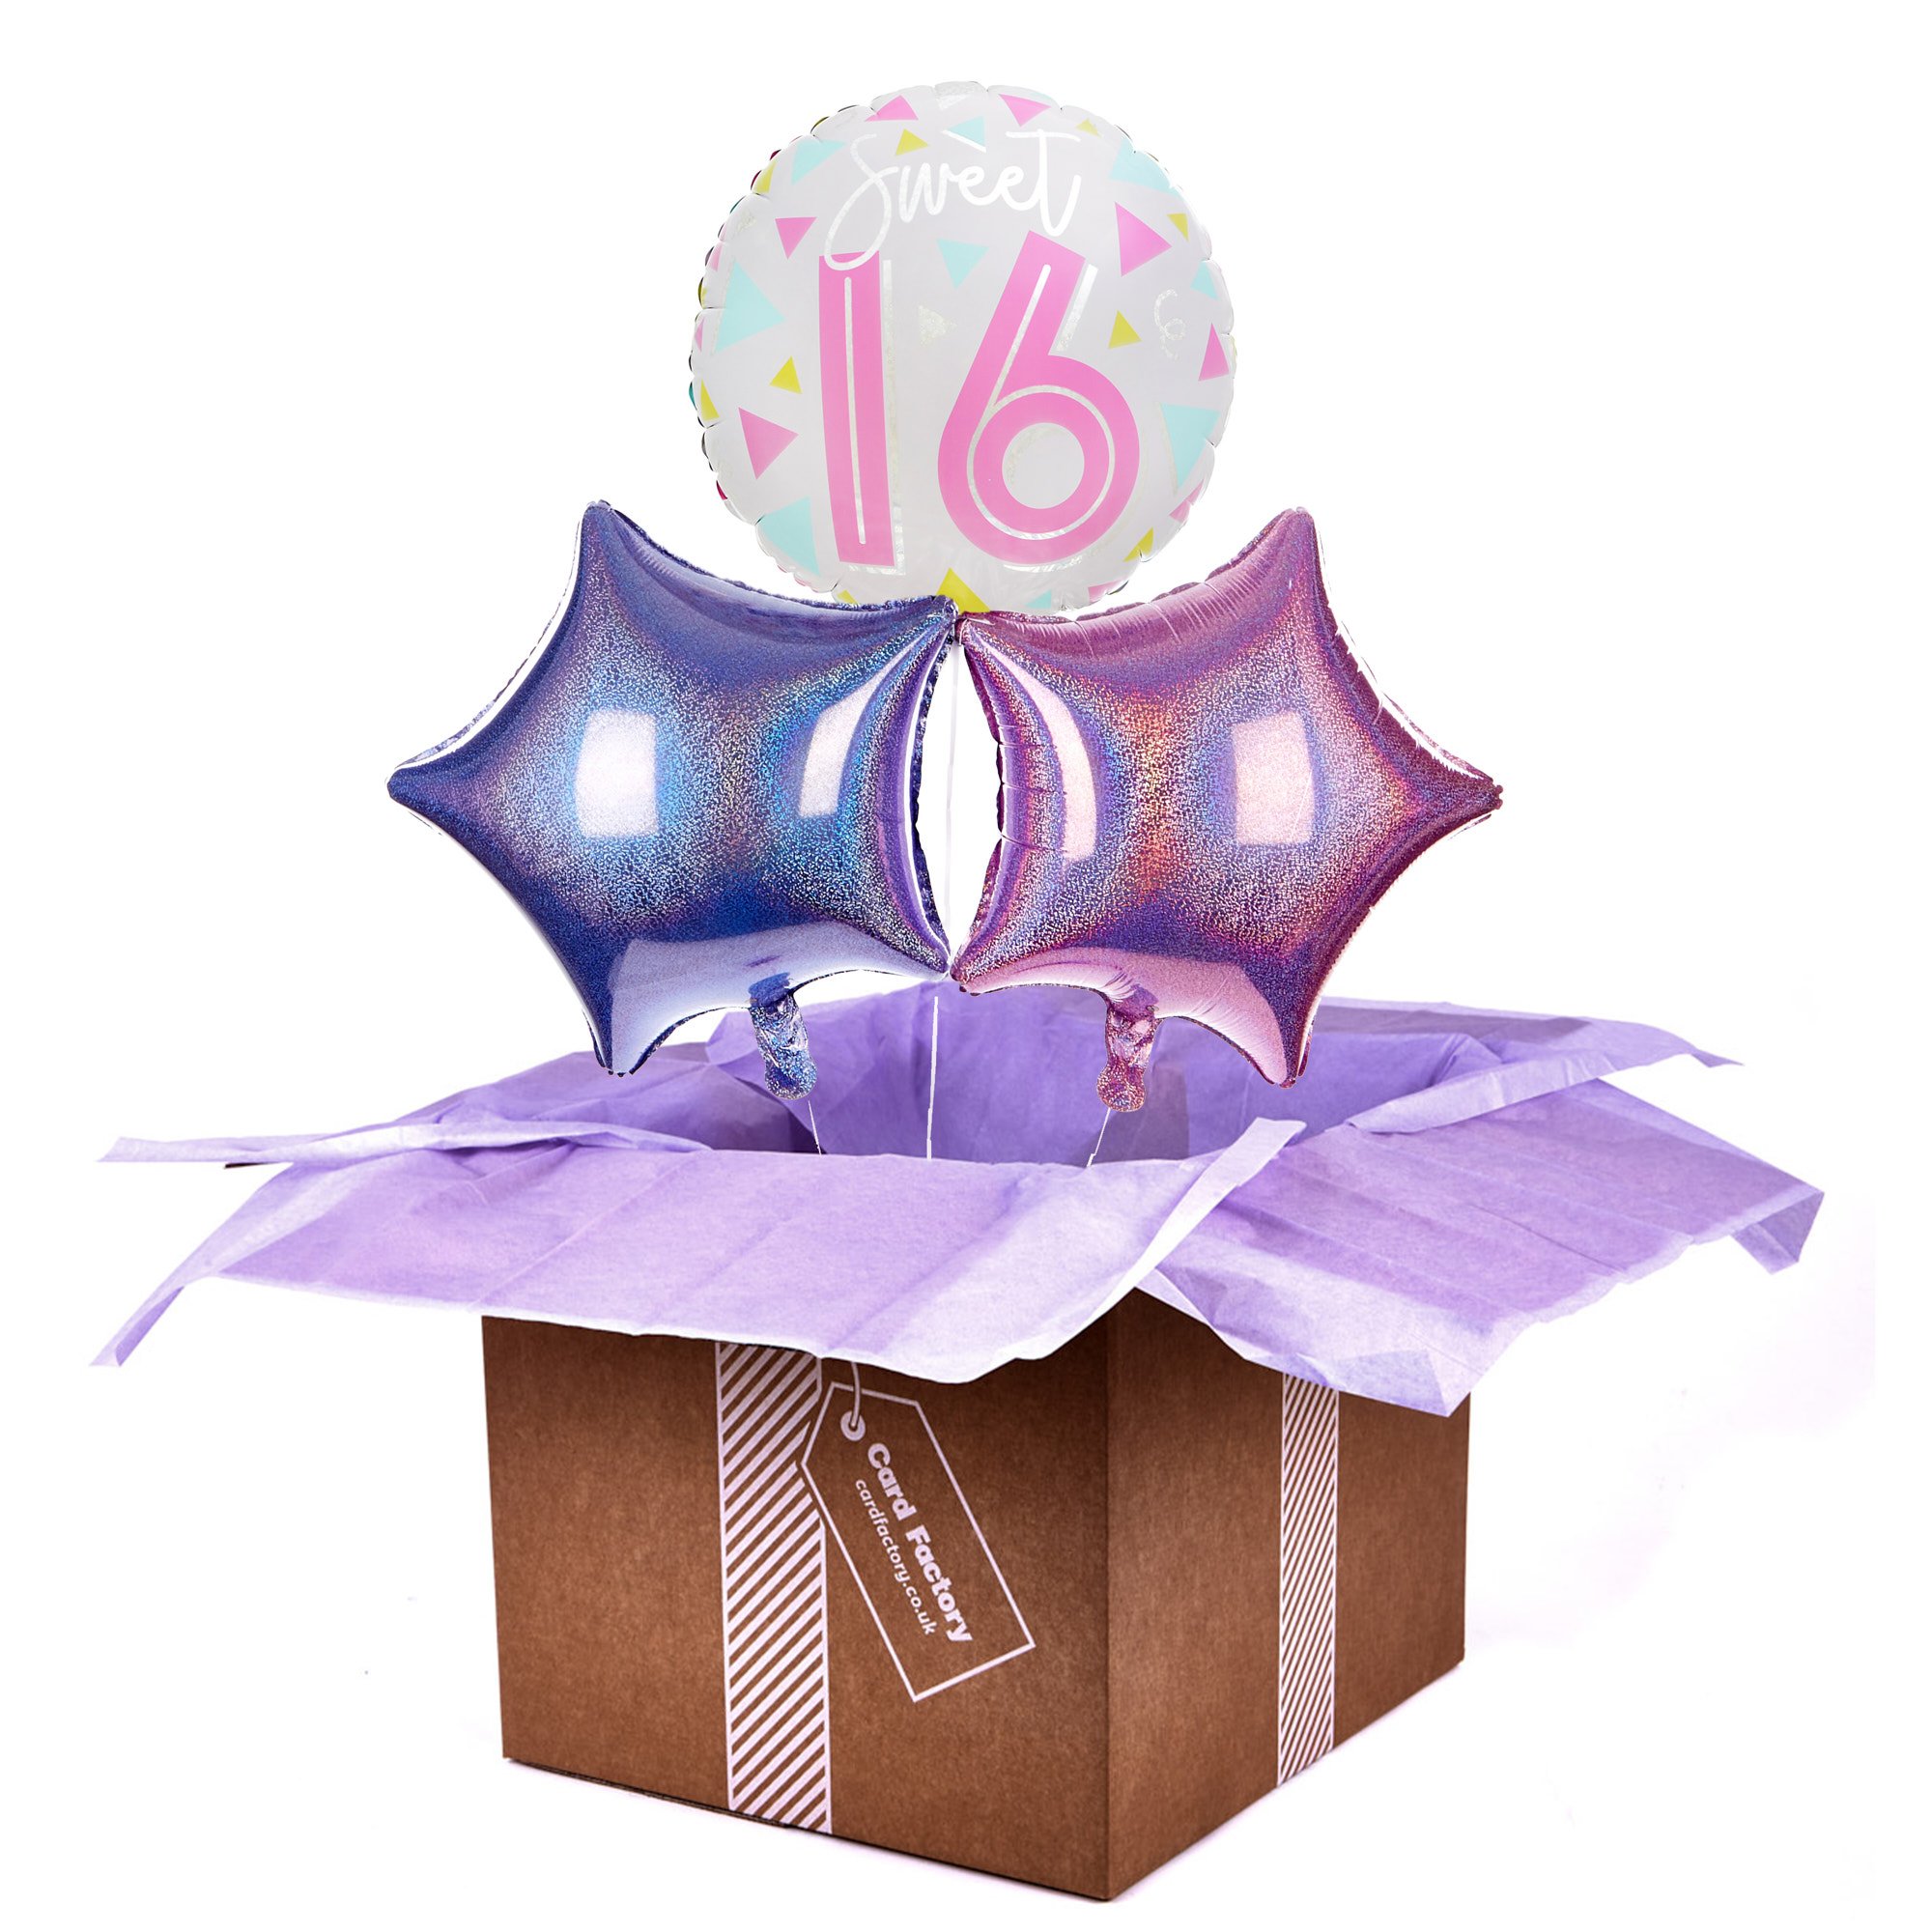 Sweet Sixteen 16th Birthday Balloon Bouquet - DELIVERED INFLATED!